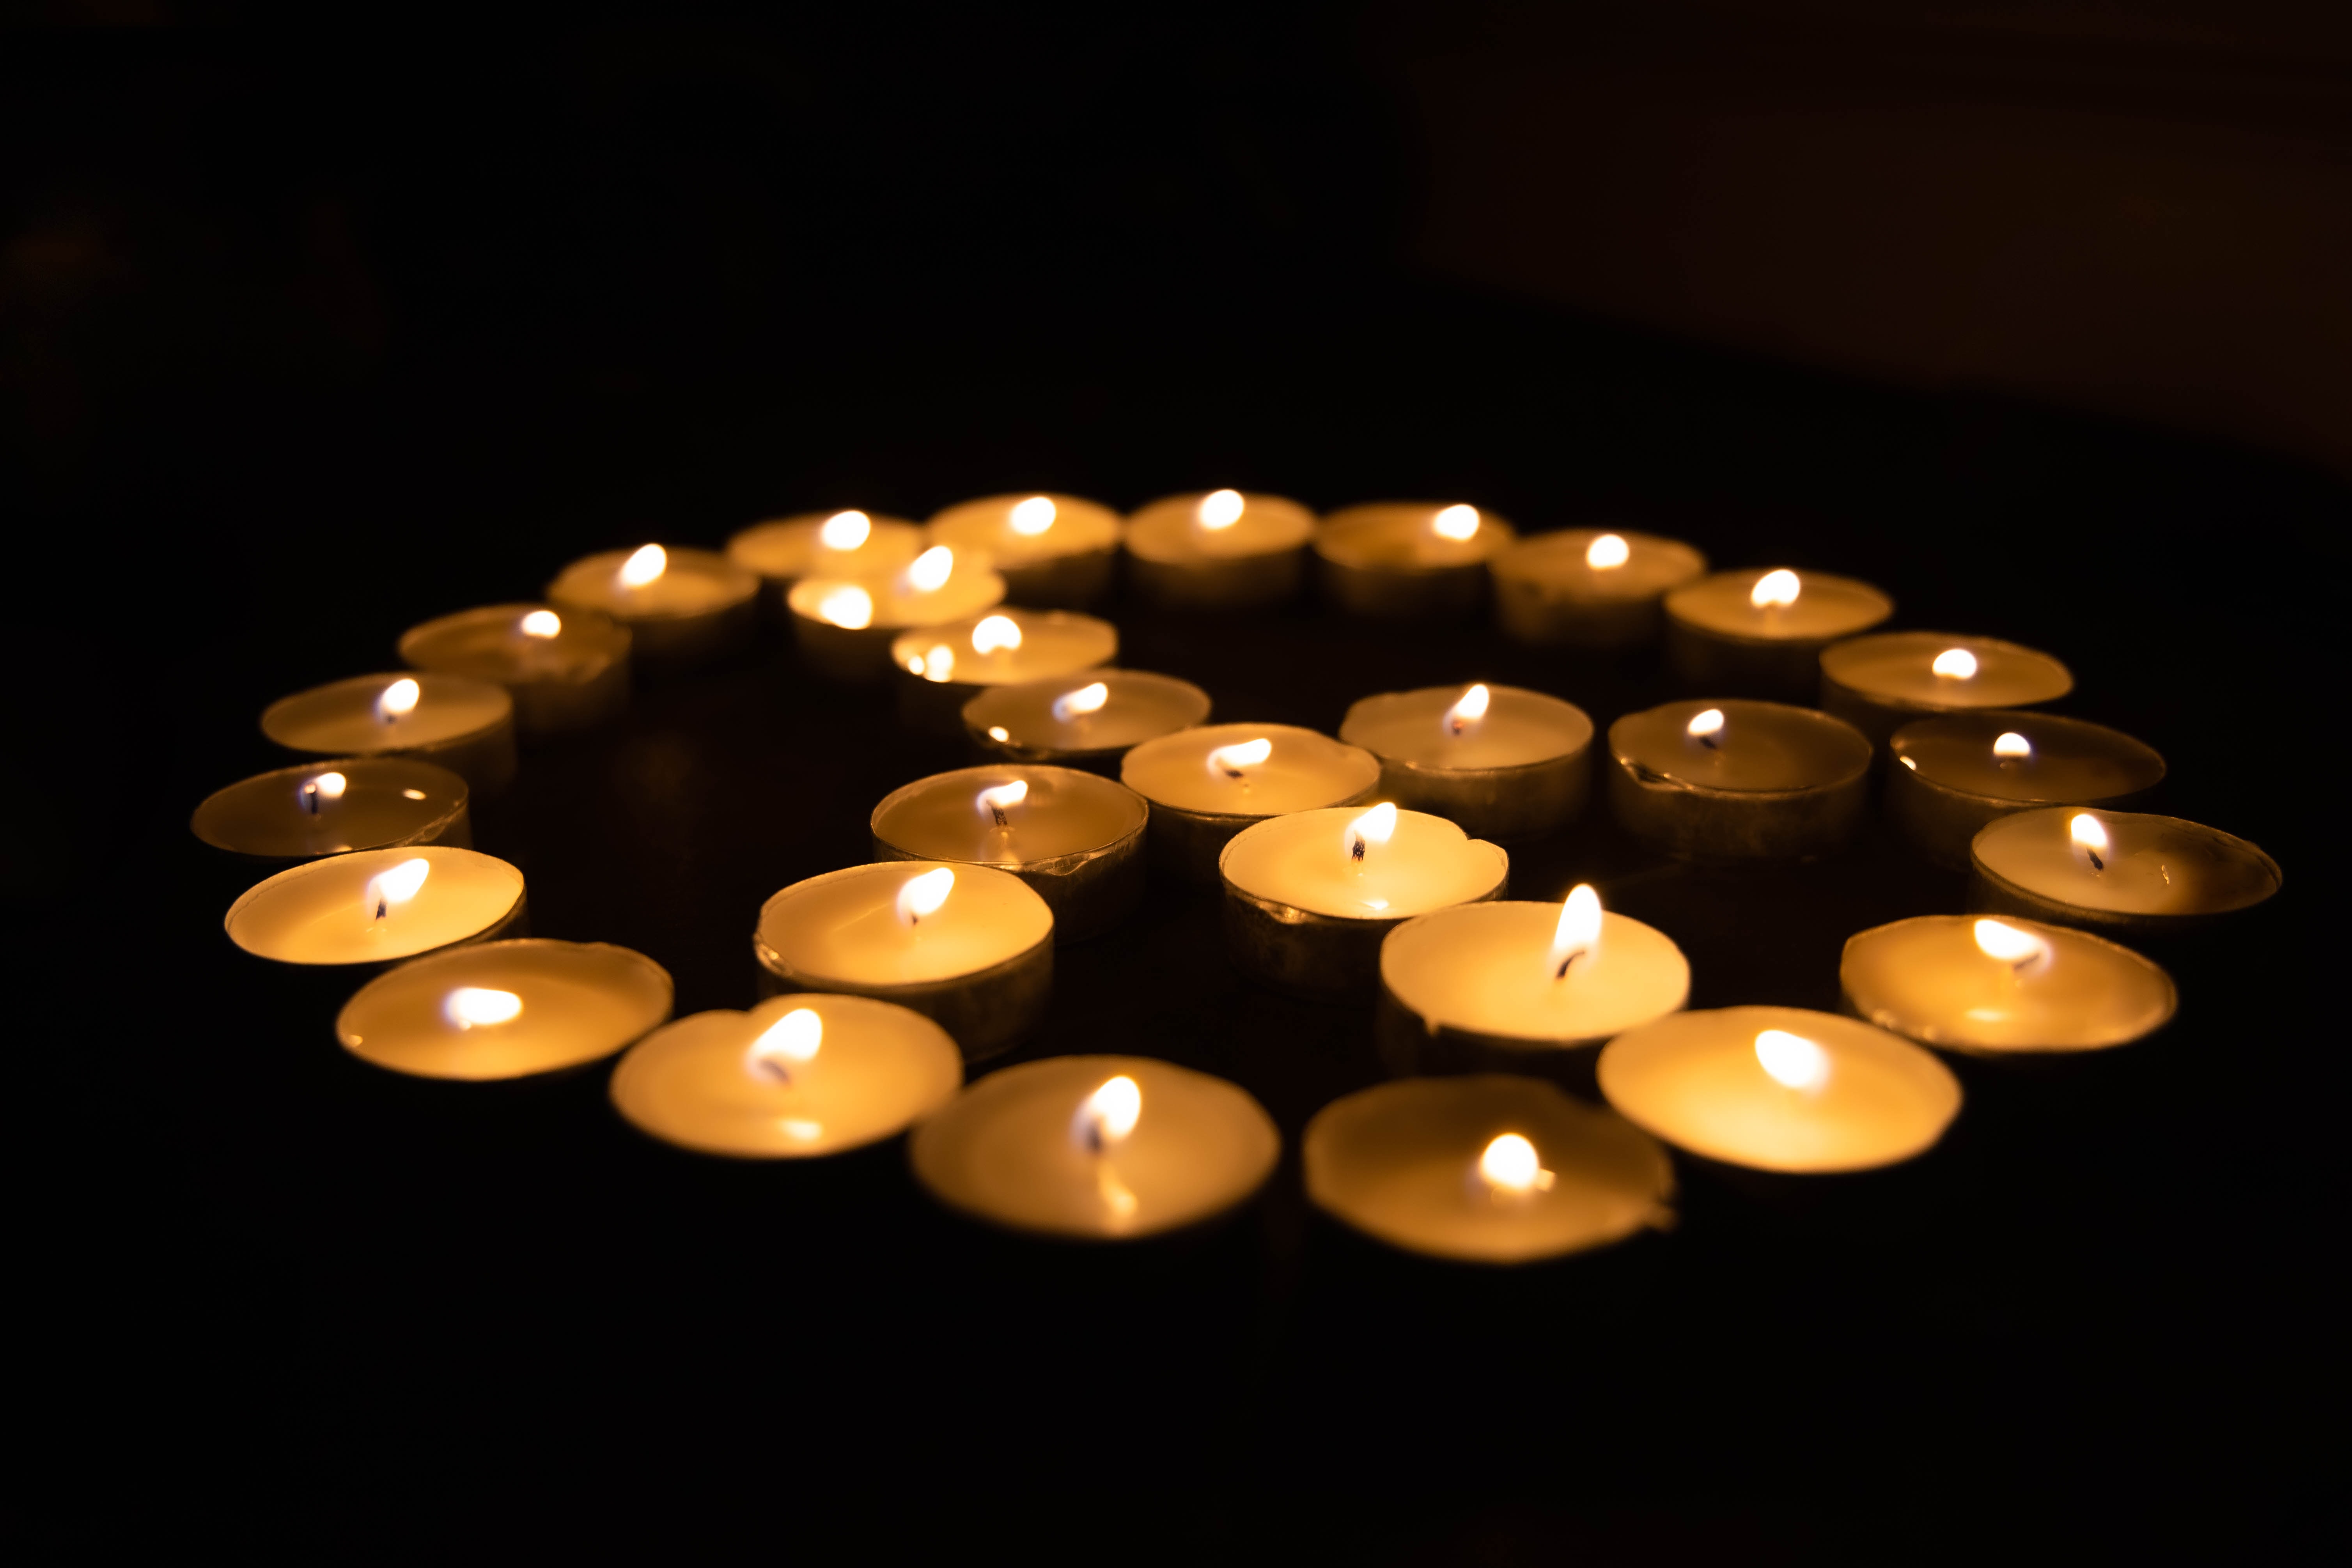 A circle of tea lights forming the sign of peace. Photo by Joshua Sukoff, Unsplash.